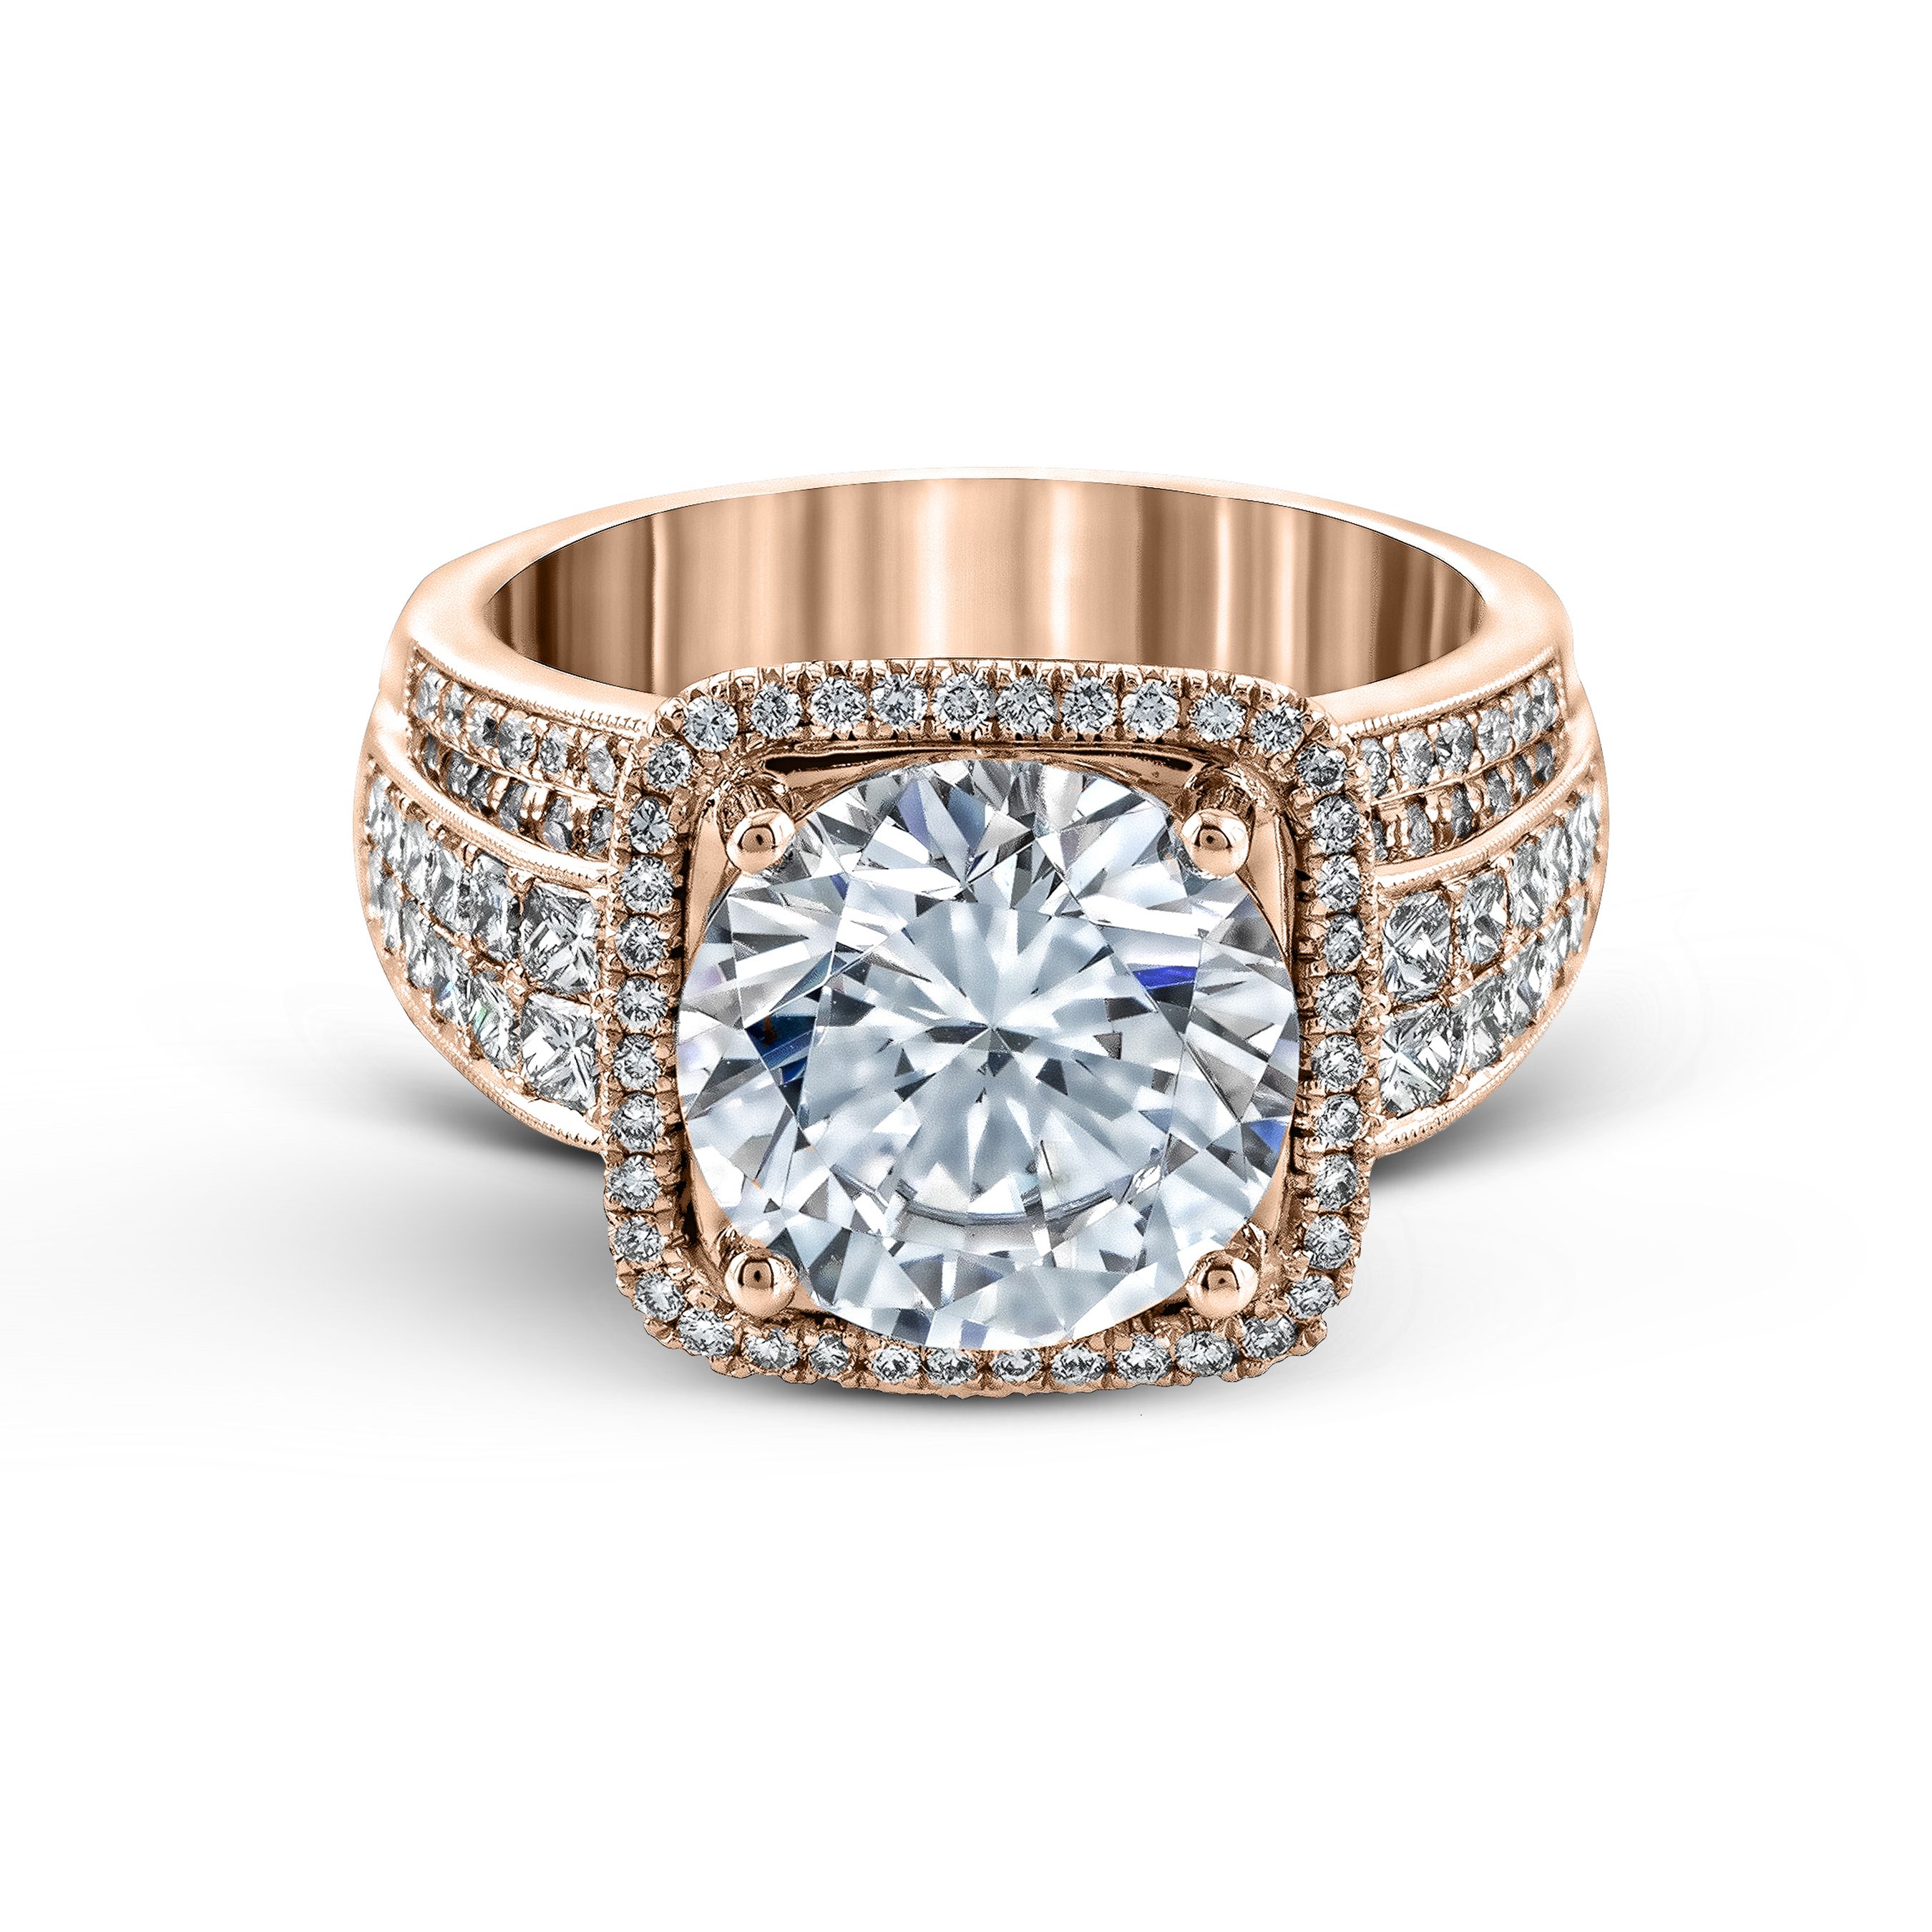 MR2097 Nocturnal Sophistication Collection Rose Gold Round Cut Engagement Ring